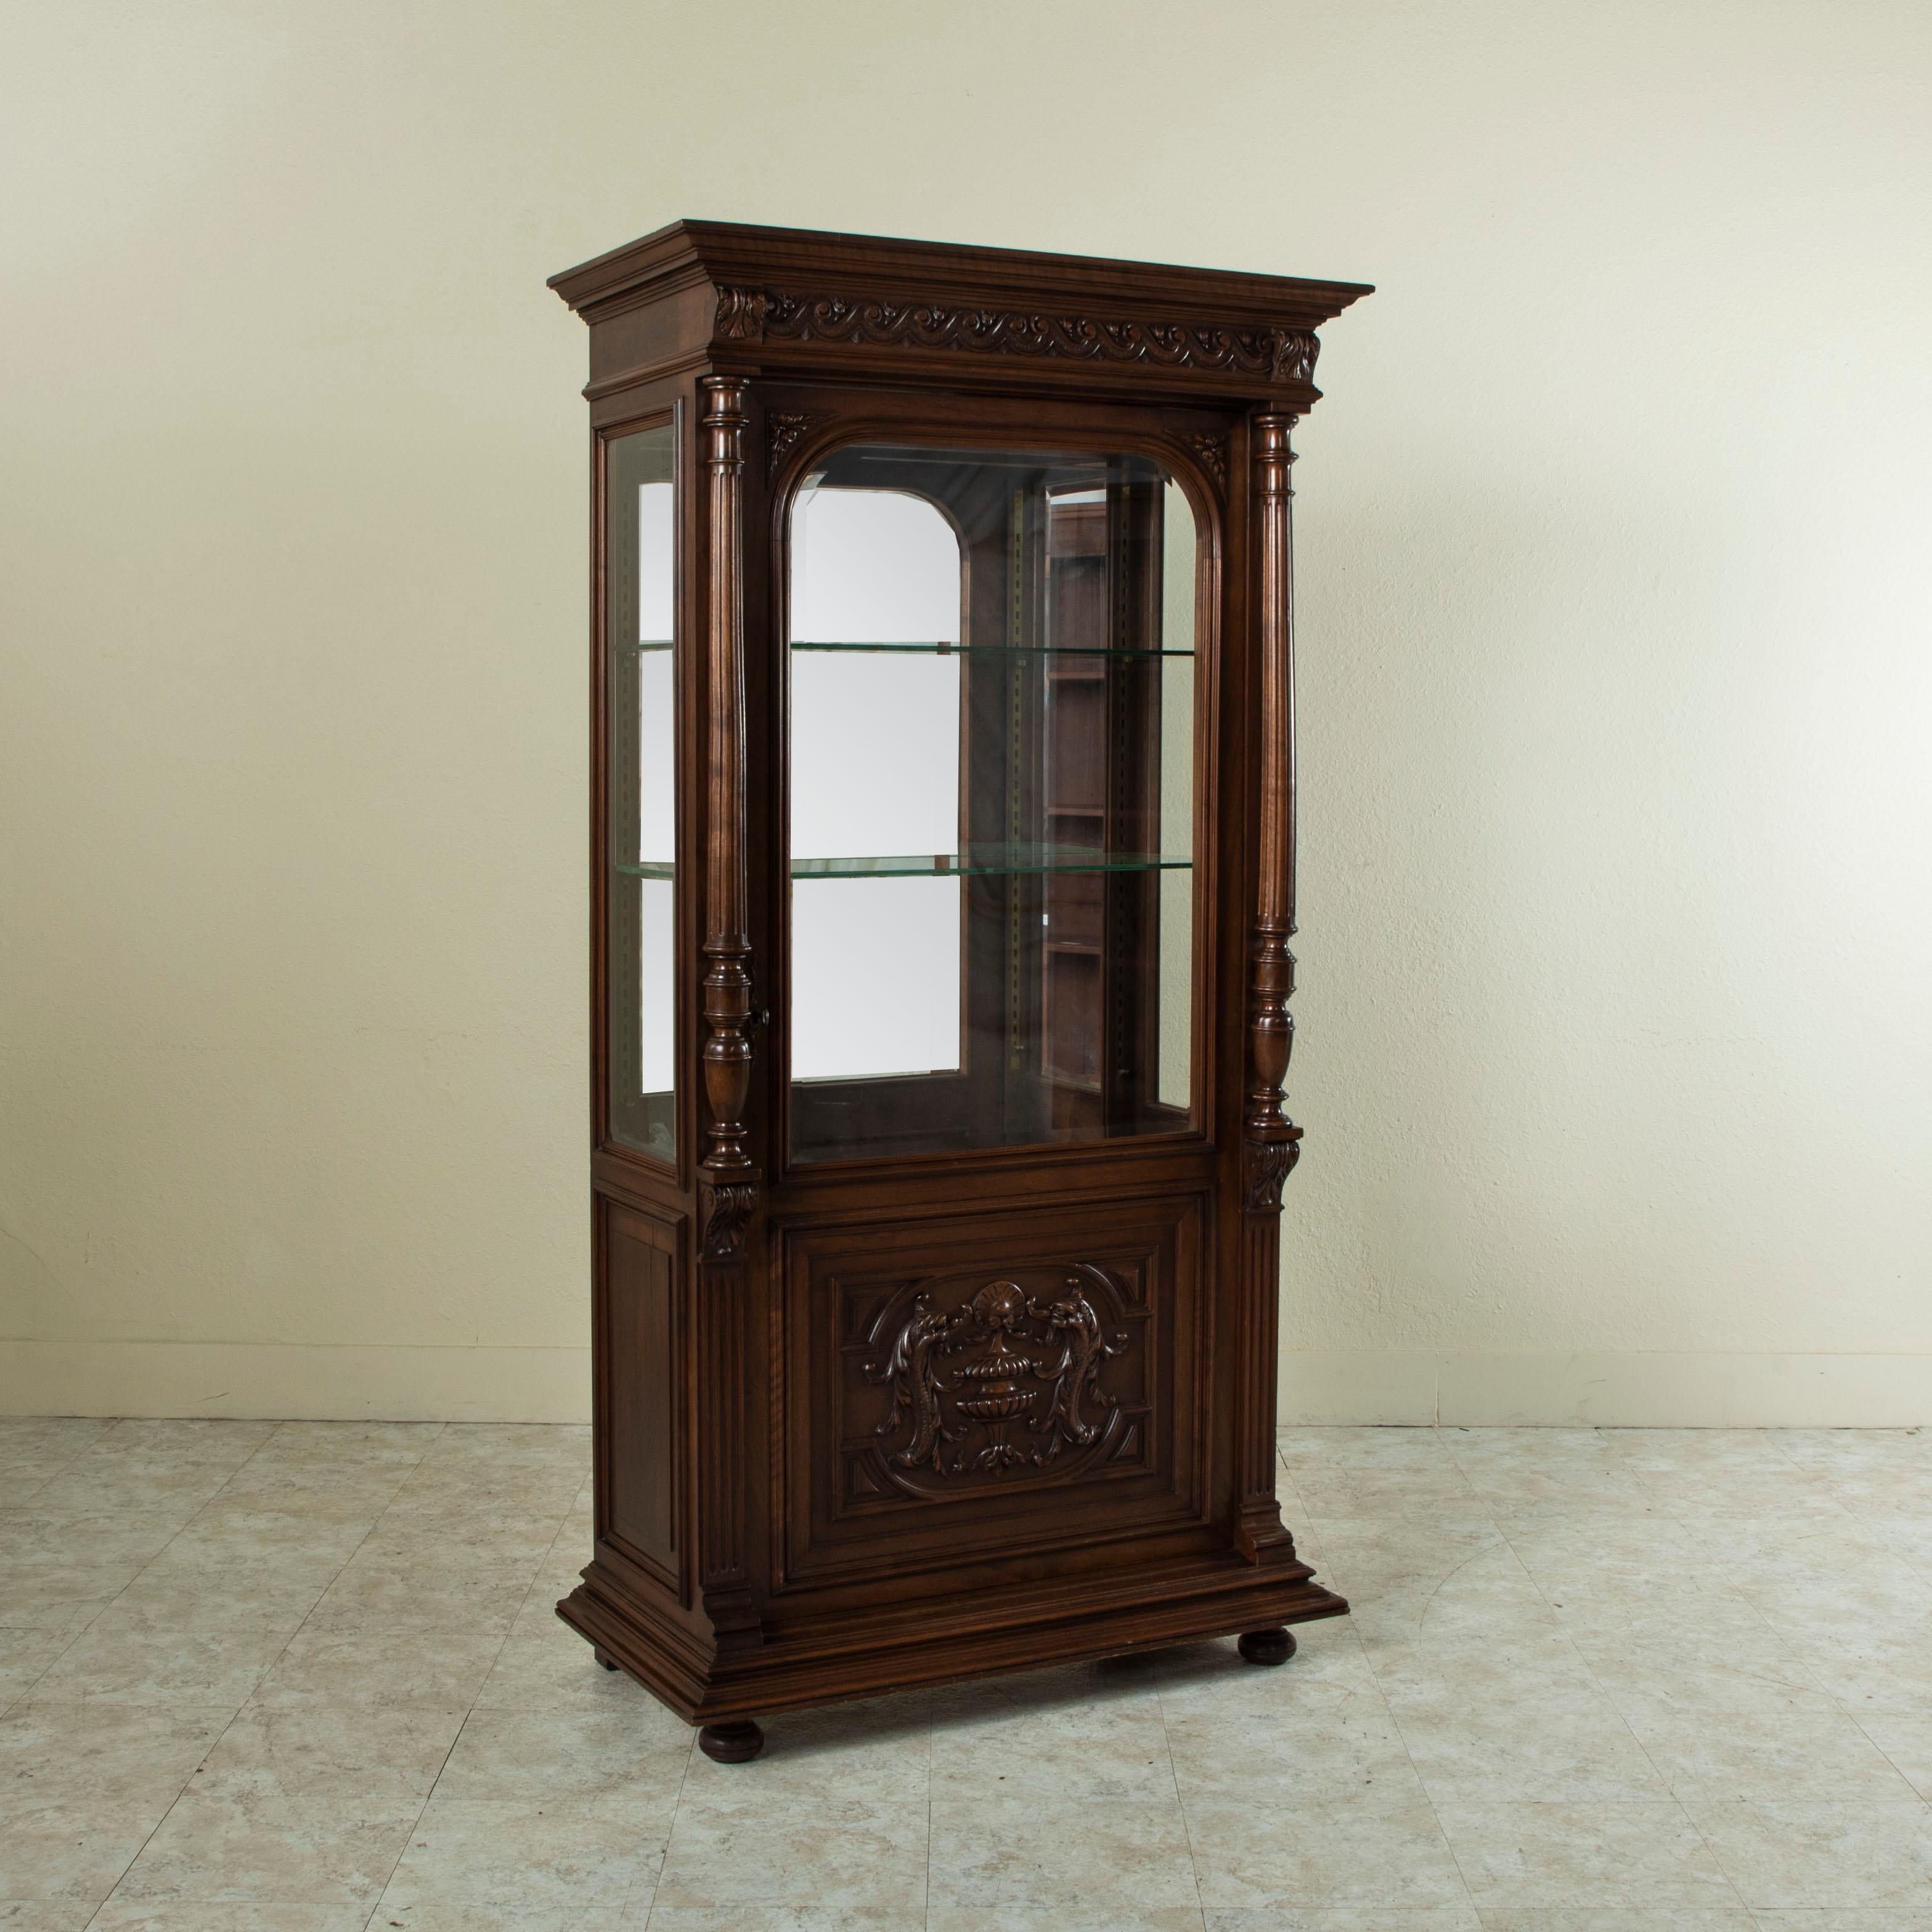 This late nineteenth century French Henri II vitrine is constructed of hand-carved walnut and features beveled glass on three sides. Hand carved acanthus leaves detail the sides and corners and two fluted columns frame the door. The lower panel of